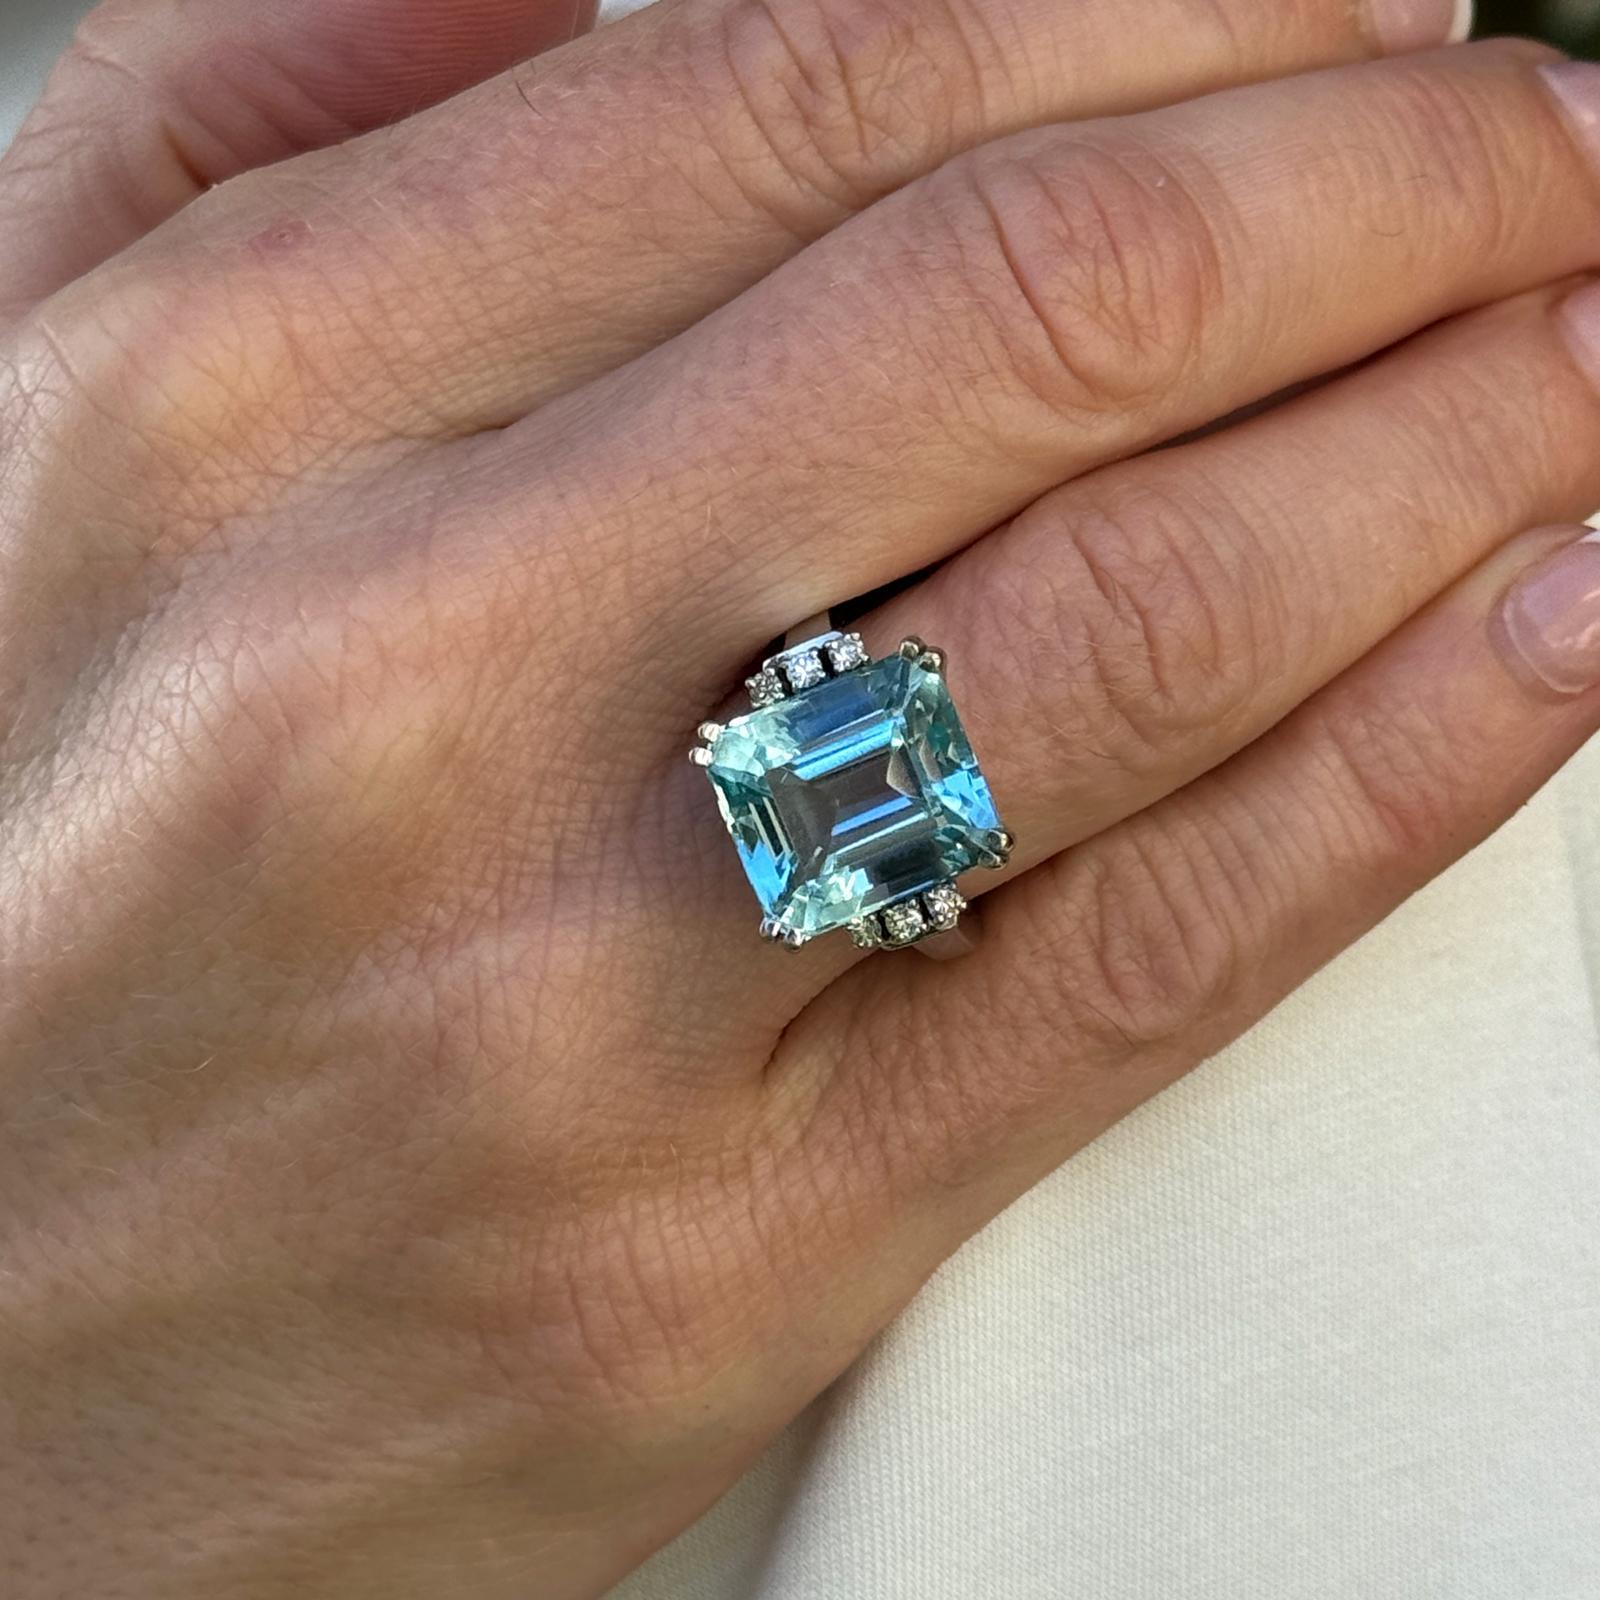 Beautiful blue aquamarine and diamond cocktail ring crafted in 14 karat white gold. The emerald cut aquamarine weighs approximately 20 carats and the 6 round brilliant cut diamond accents weigh approximately .18 carat total weight. The ring measures